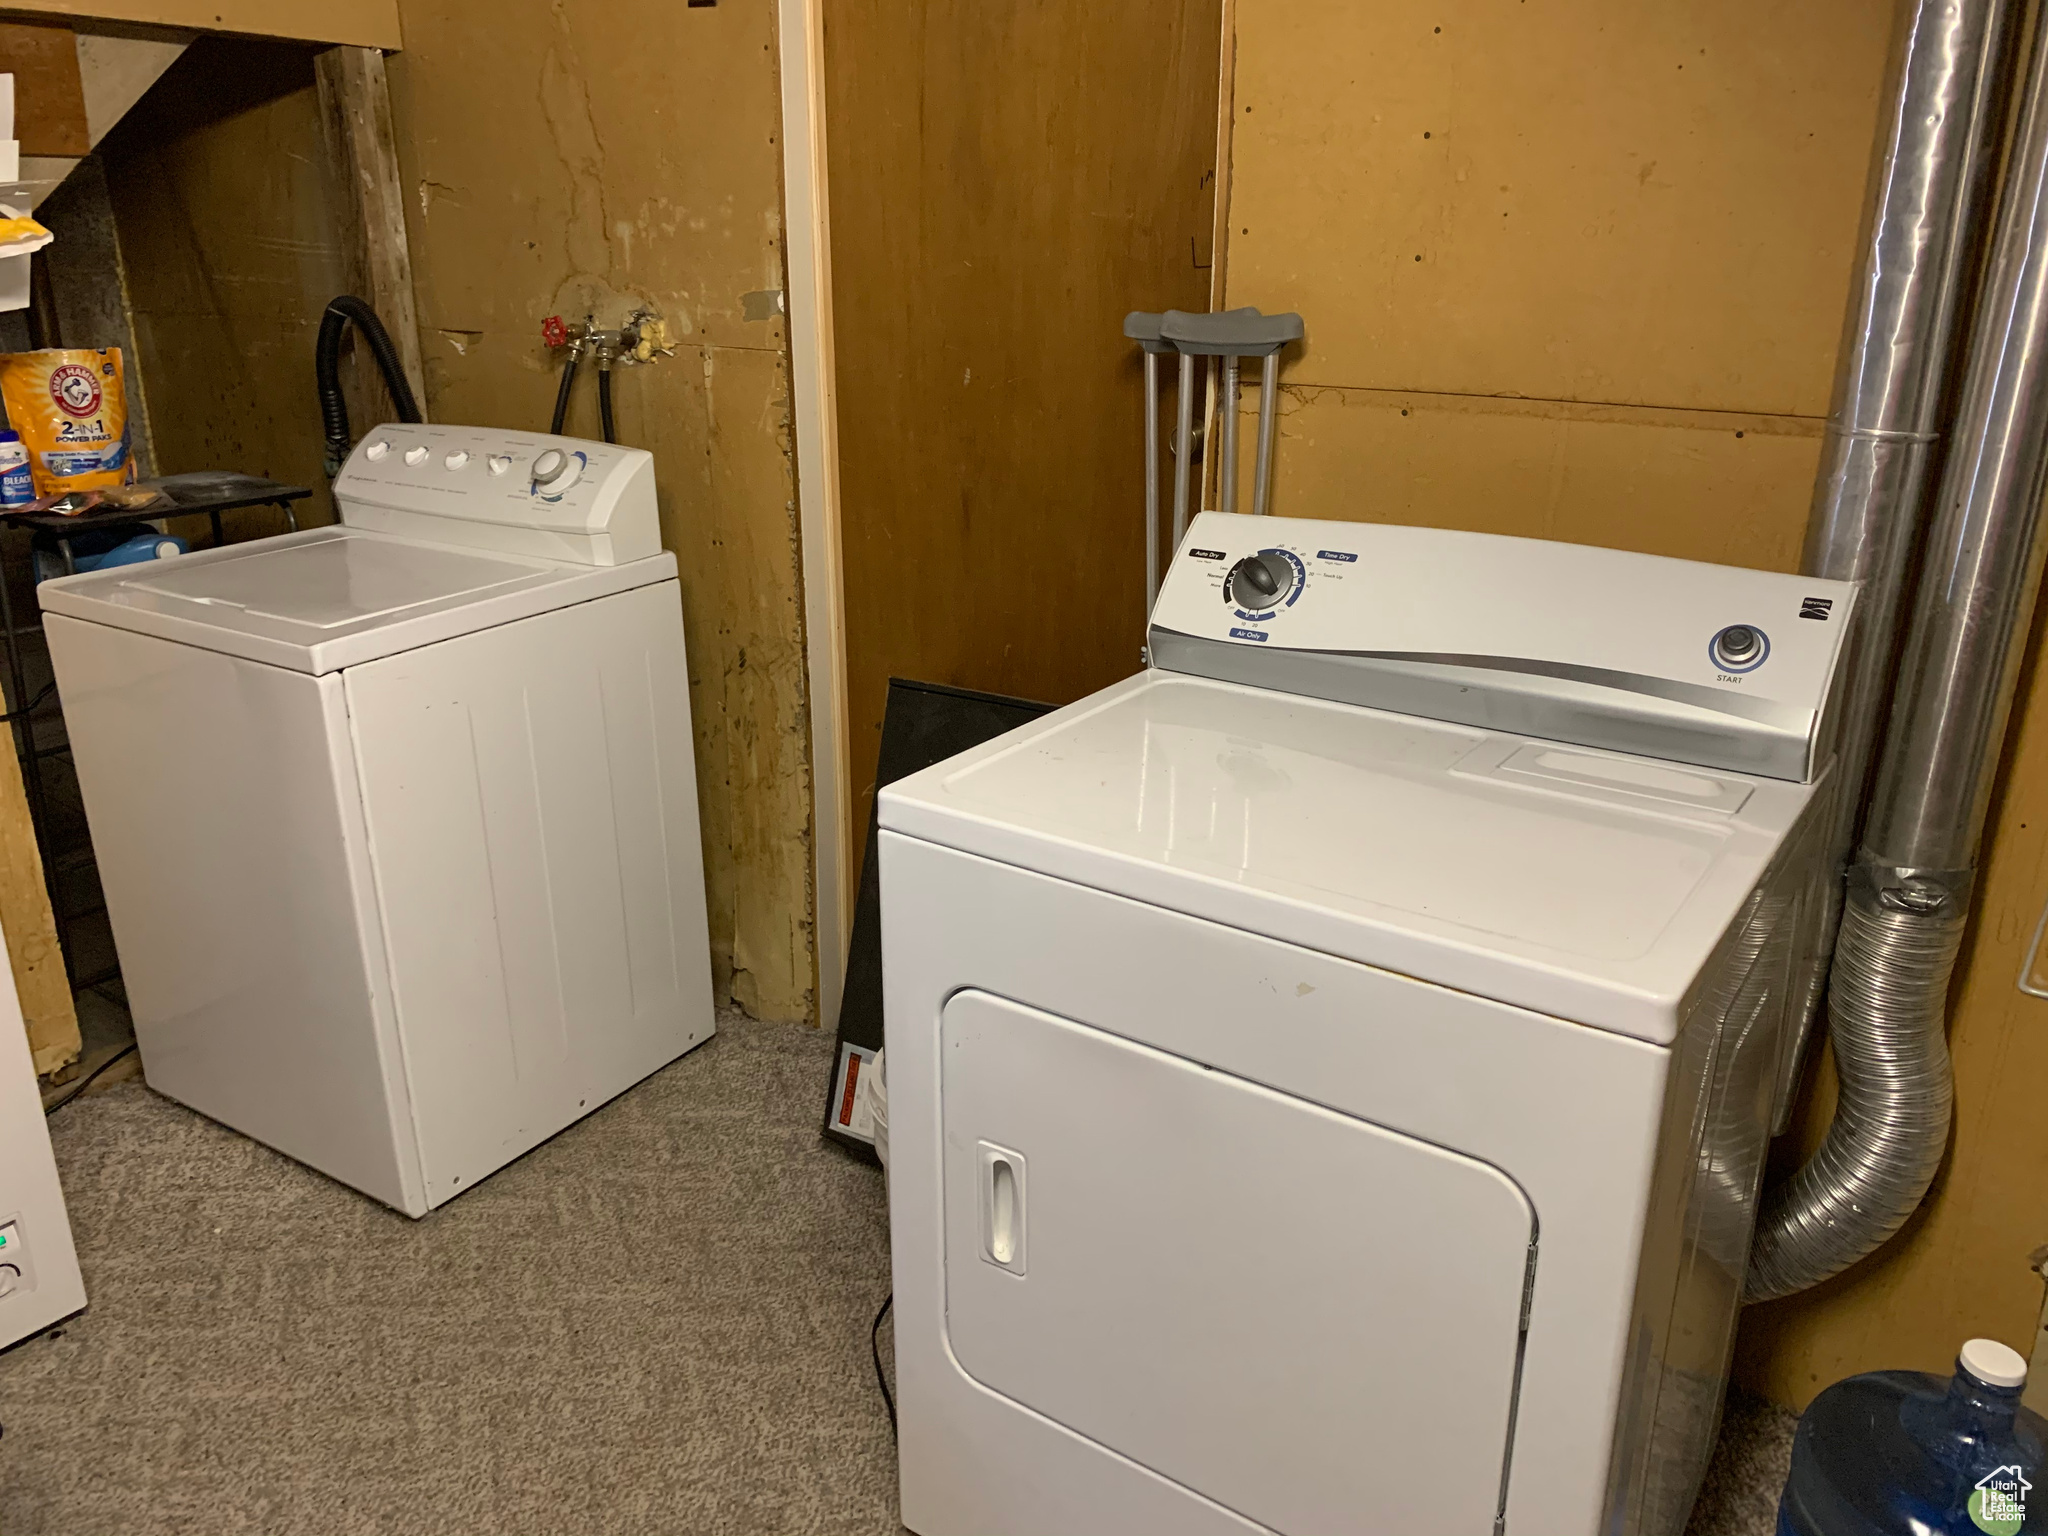 Clothes washing area featuring independent washer and dryer, carpet, and washer hookup